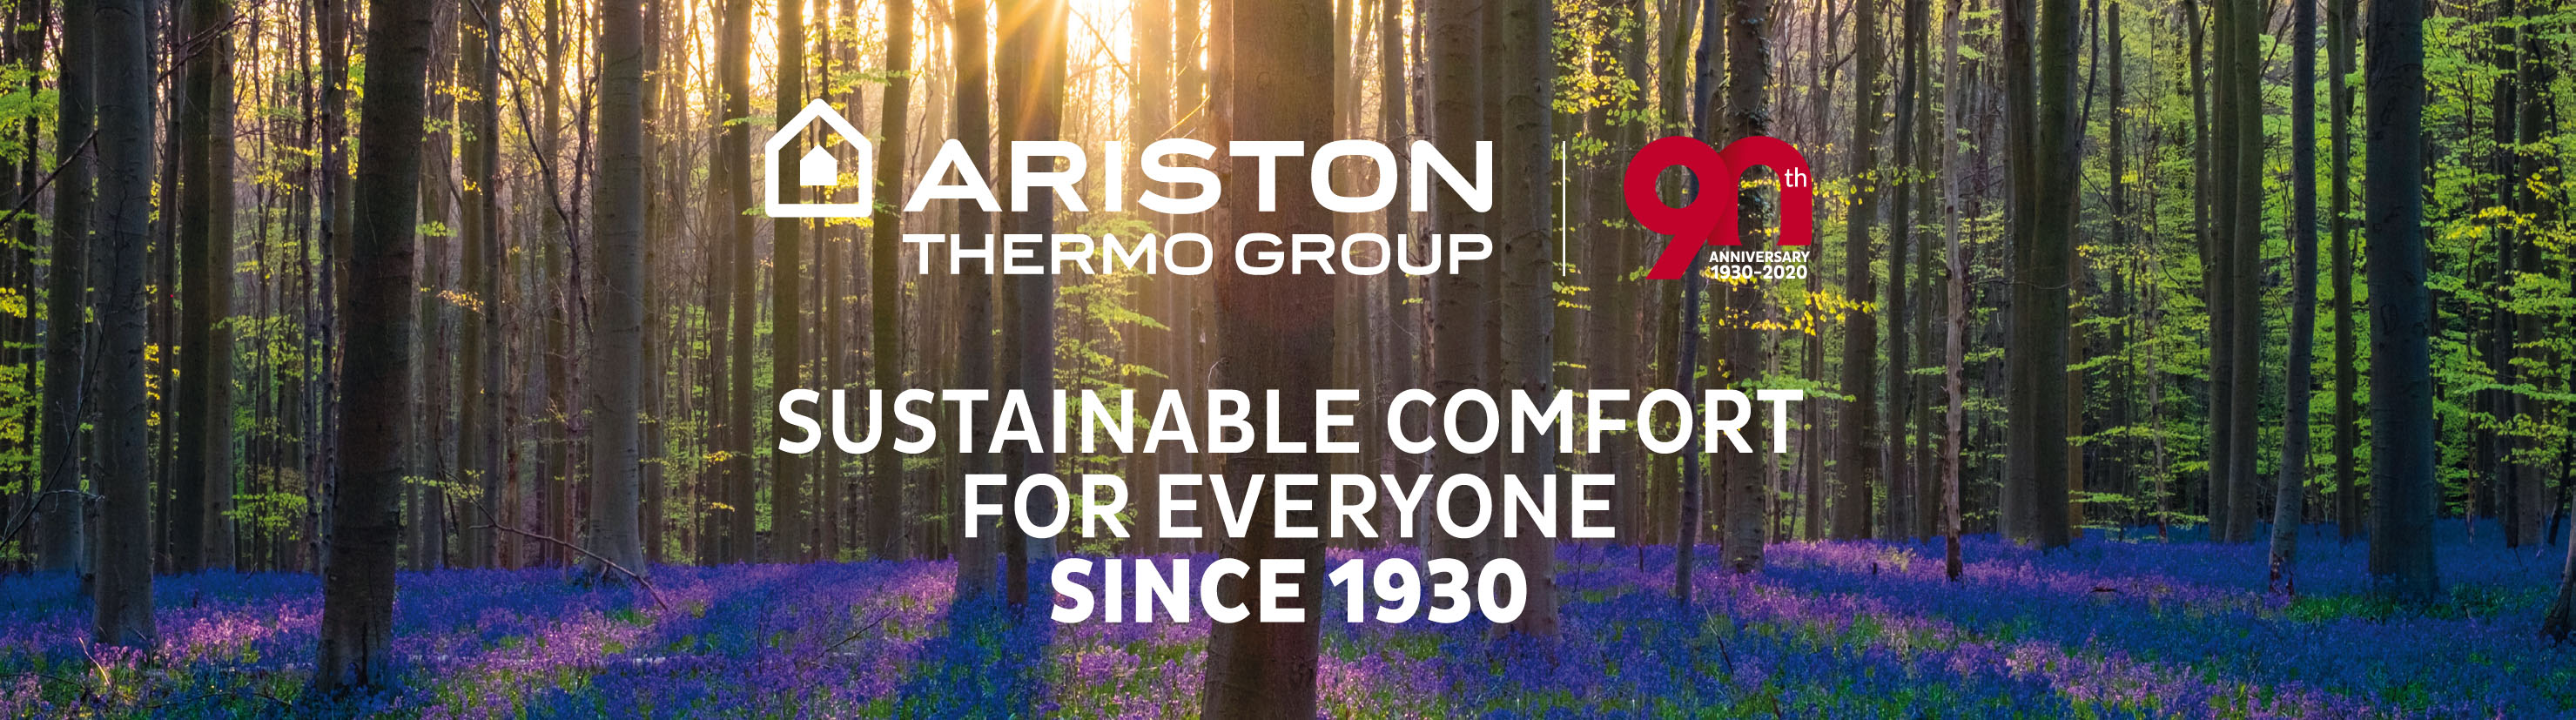 Elco Burners Ariston Thermo Group 90th Anniversary